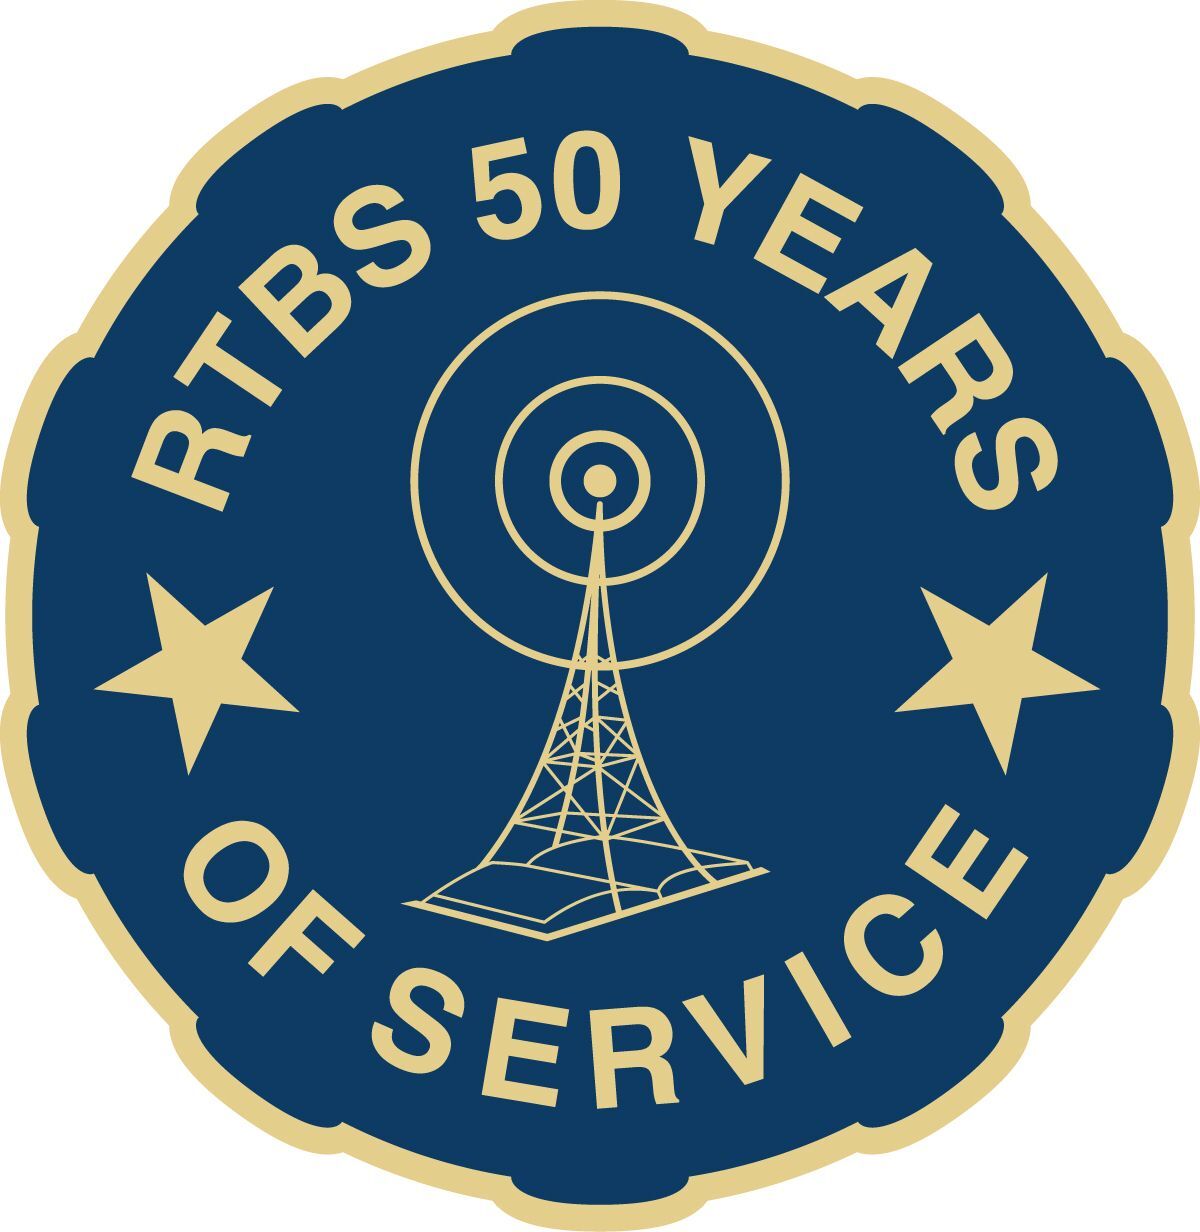 blue circle outlined in gold with a gold radio tower encircled by text "RTBS 50 Years of Service"